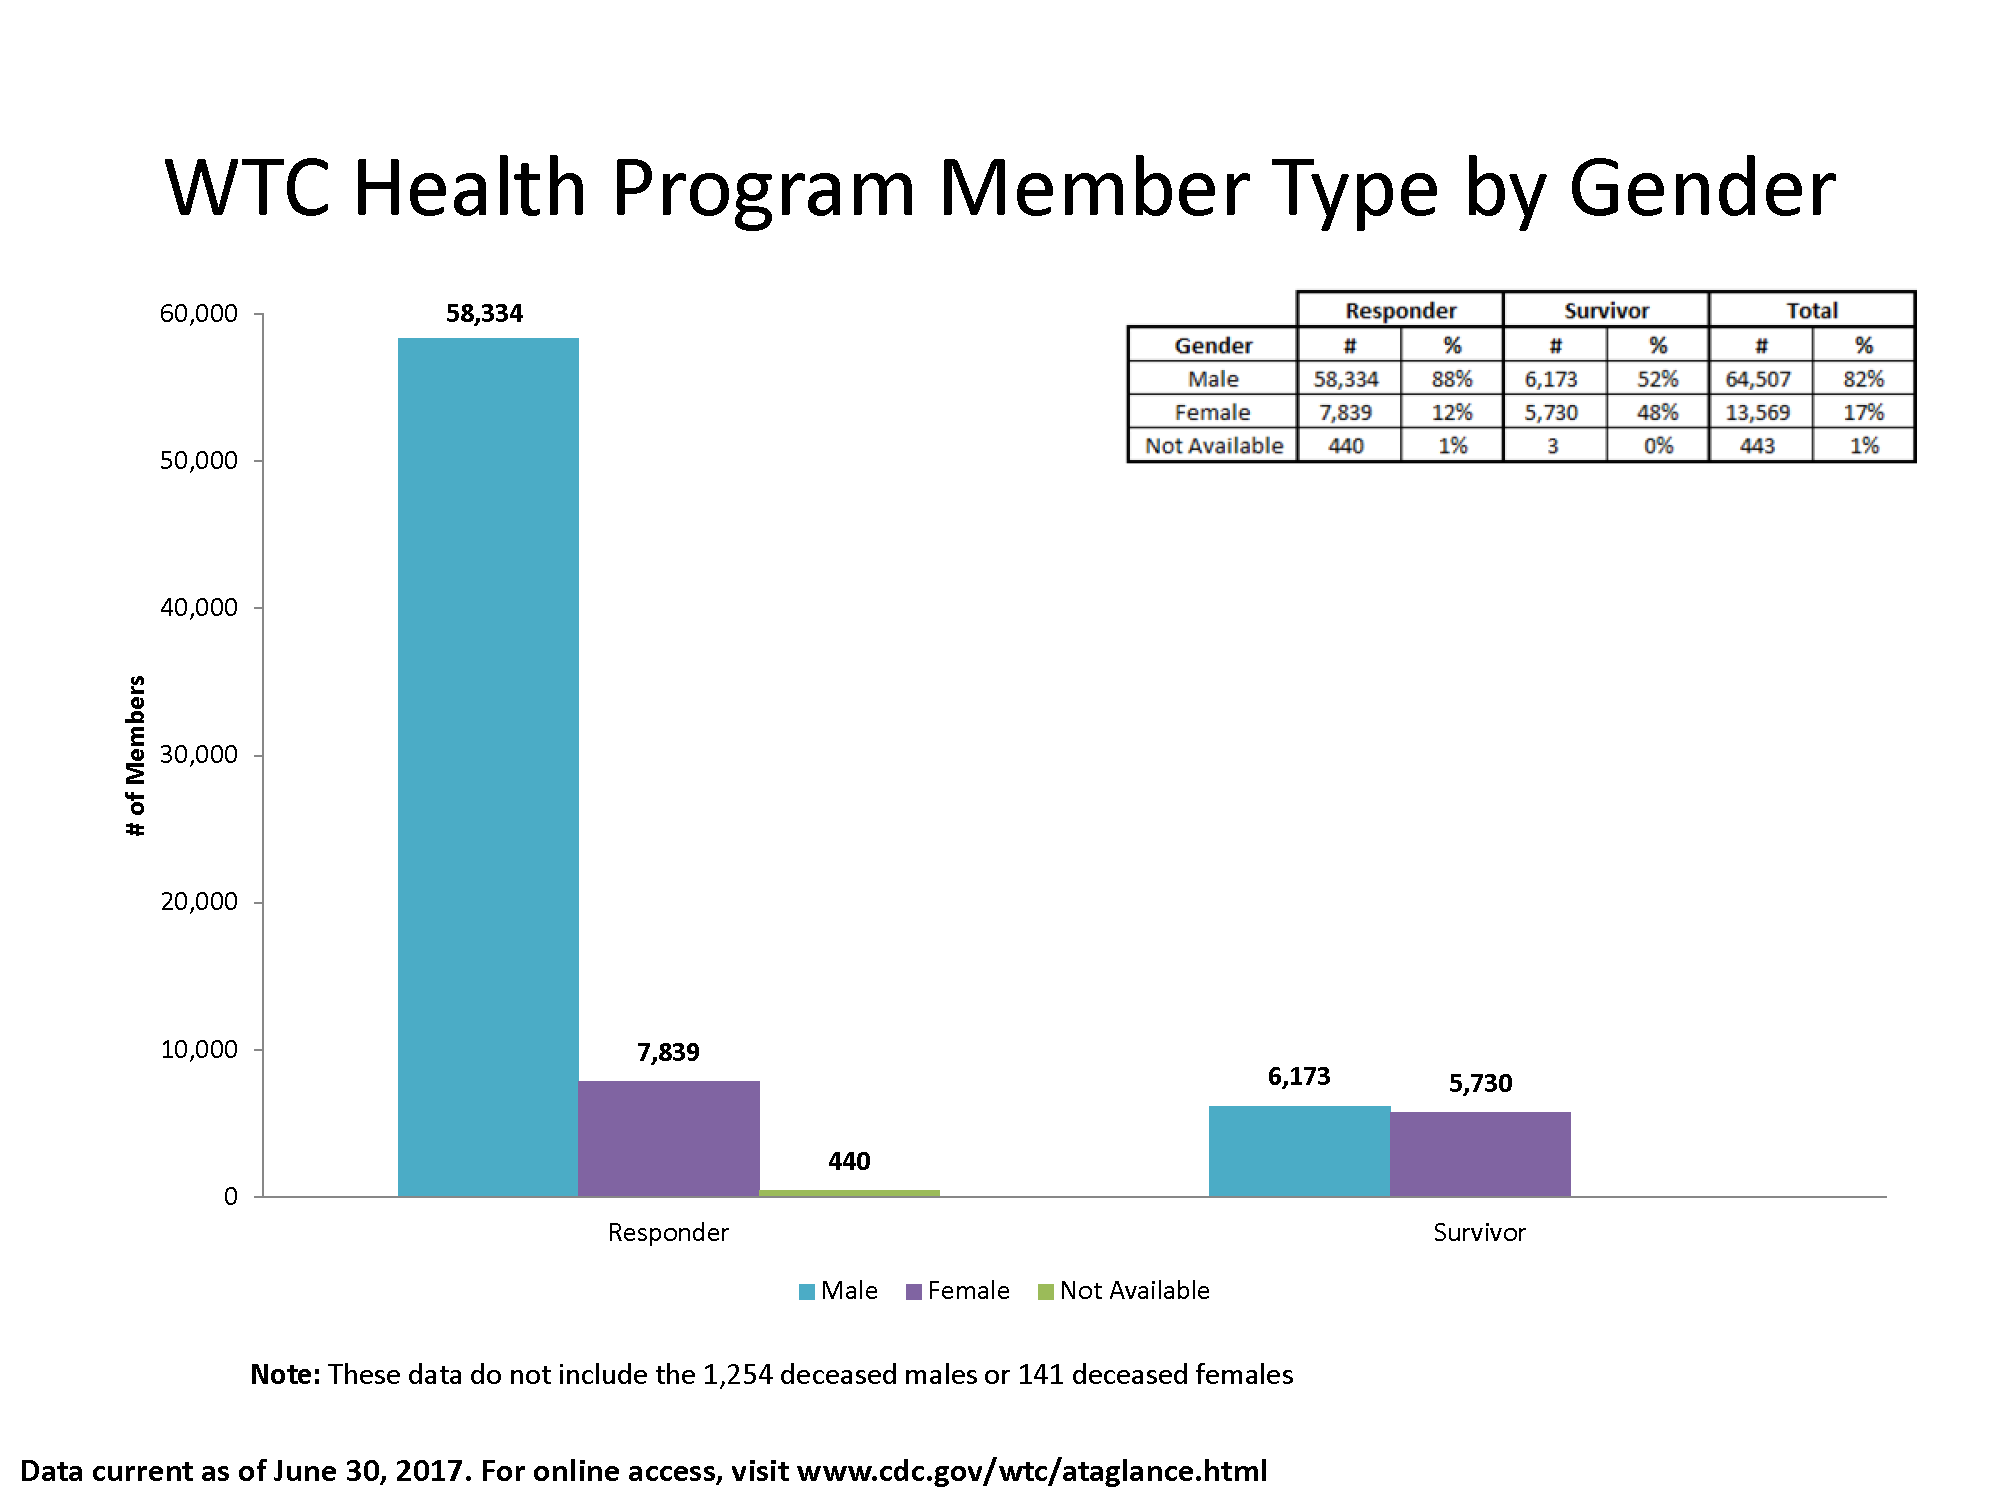 Bar chart of data in table showing the gender of members.